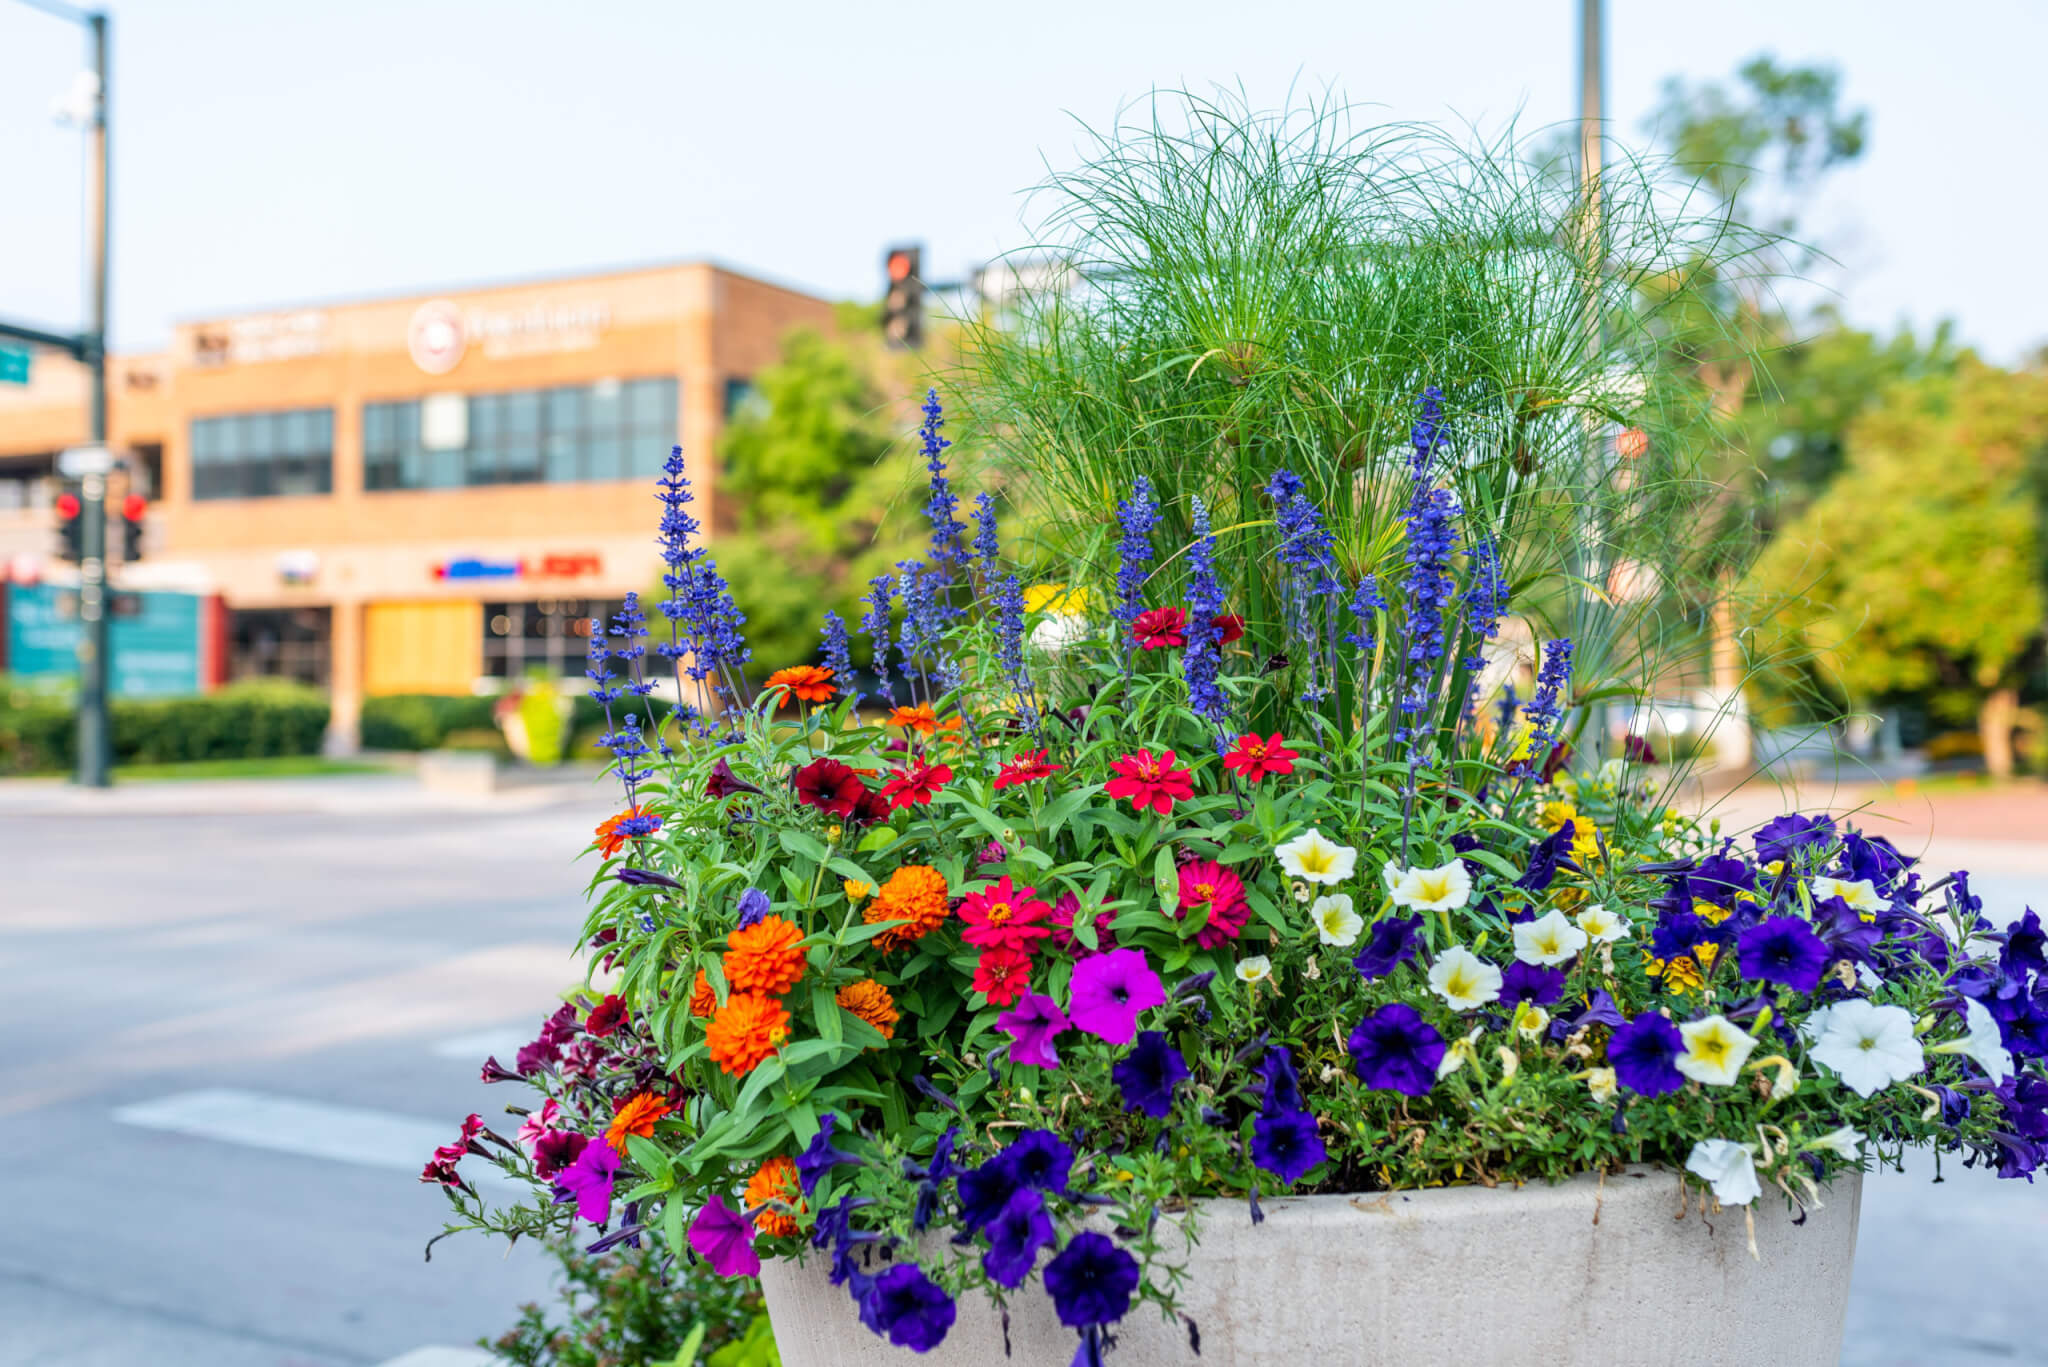 A big flower pot filled with colourful flower plants Located on side of a road